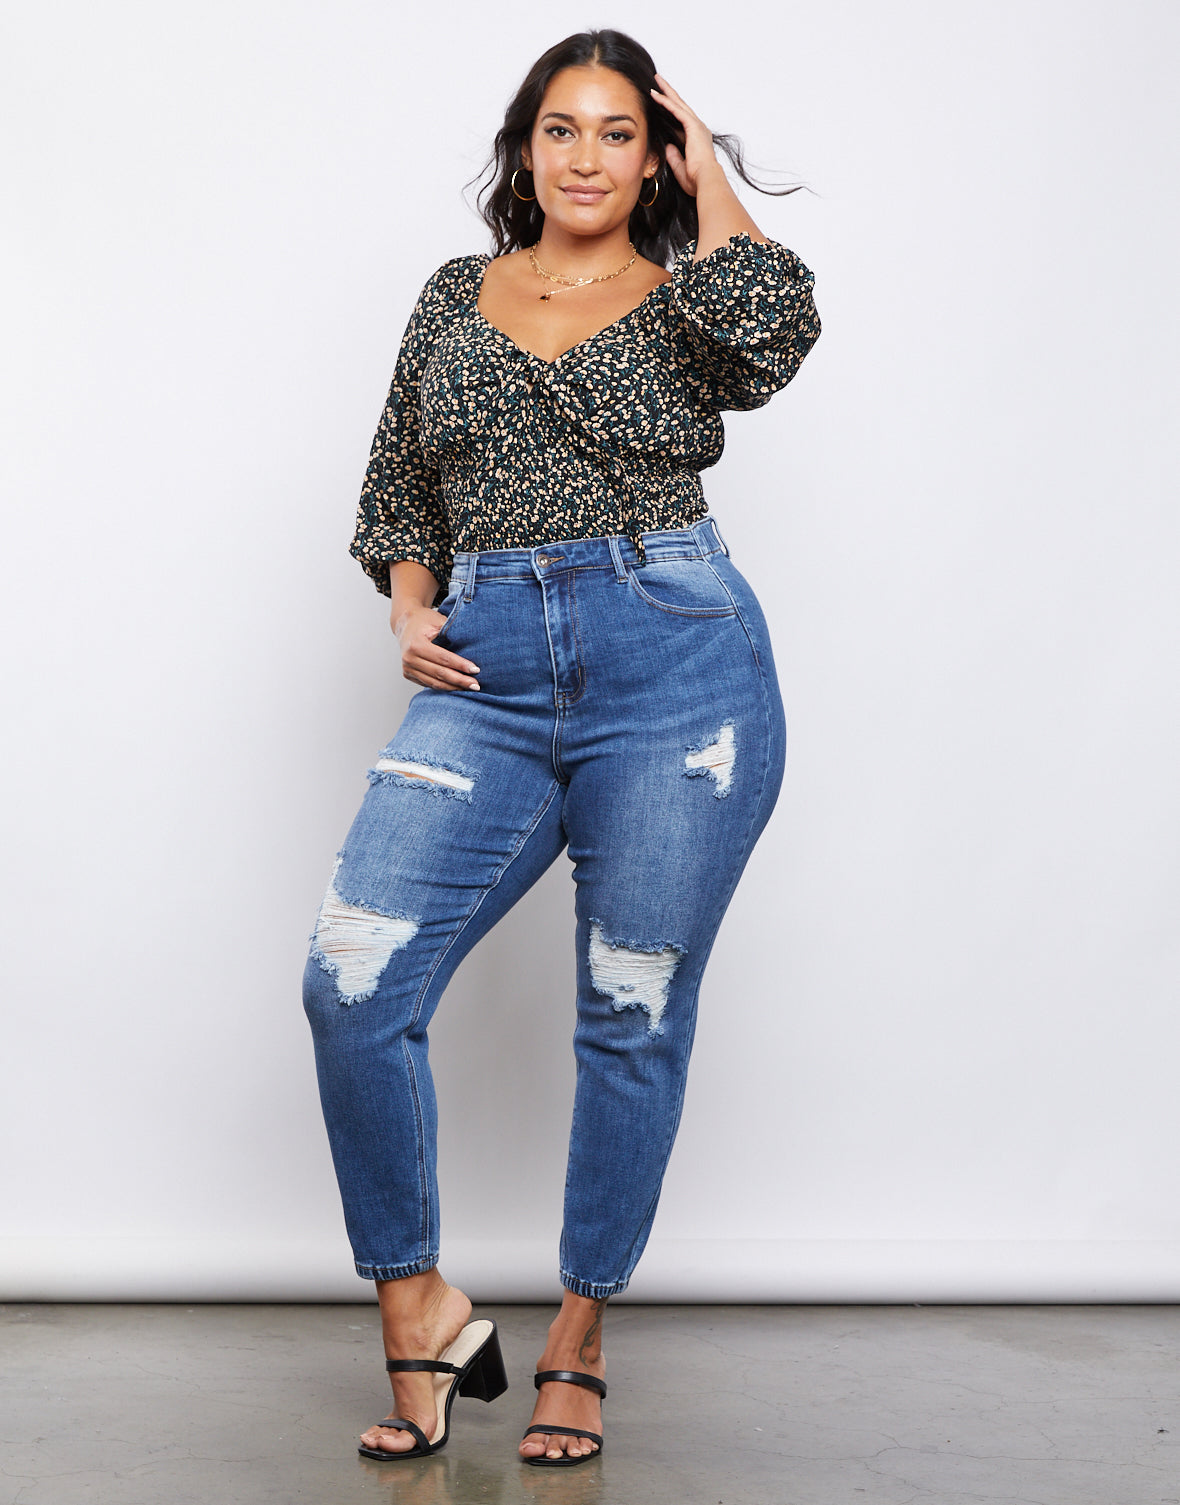 Game-changing comfort, designed for Plus Size